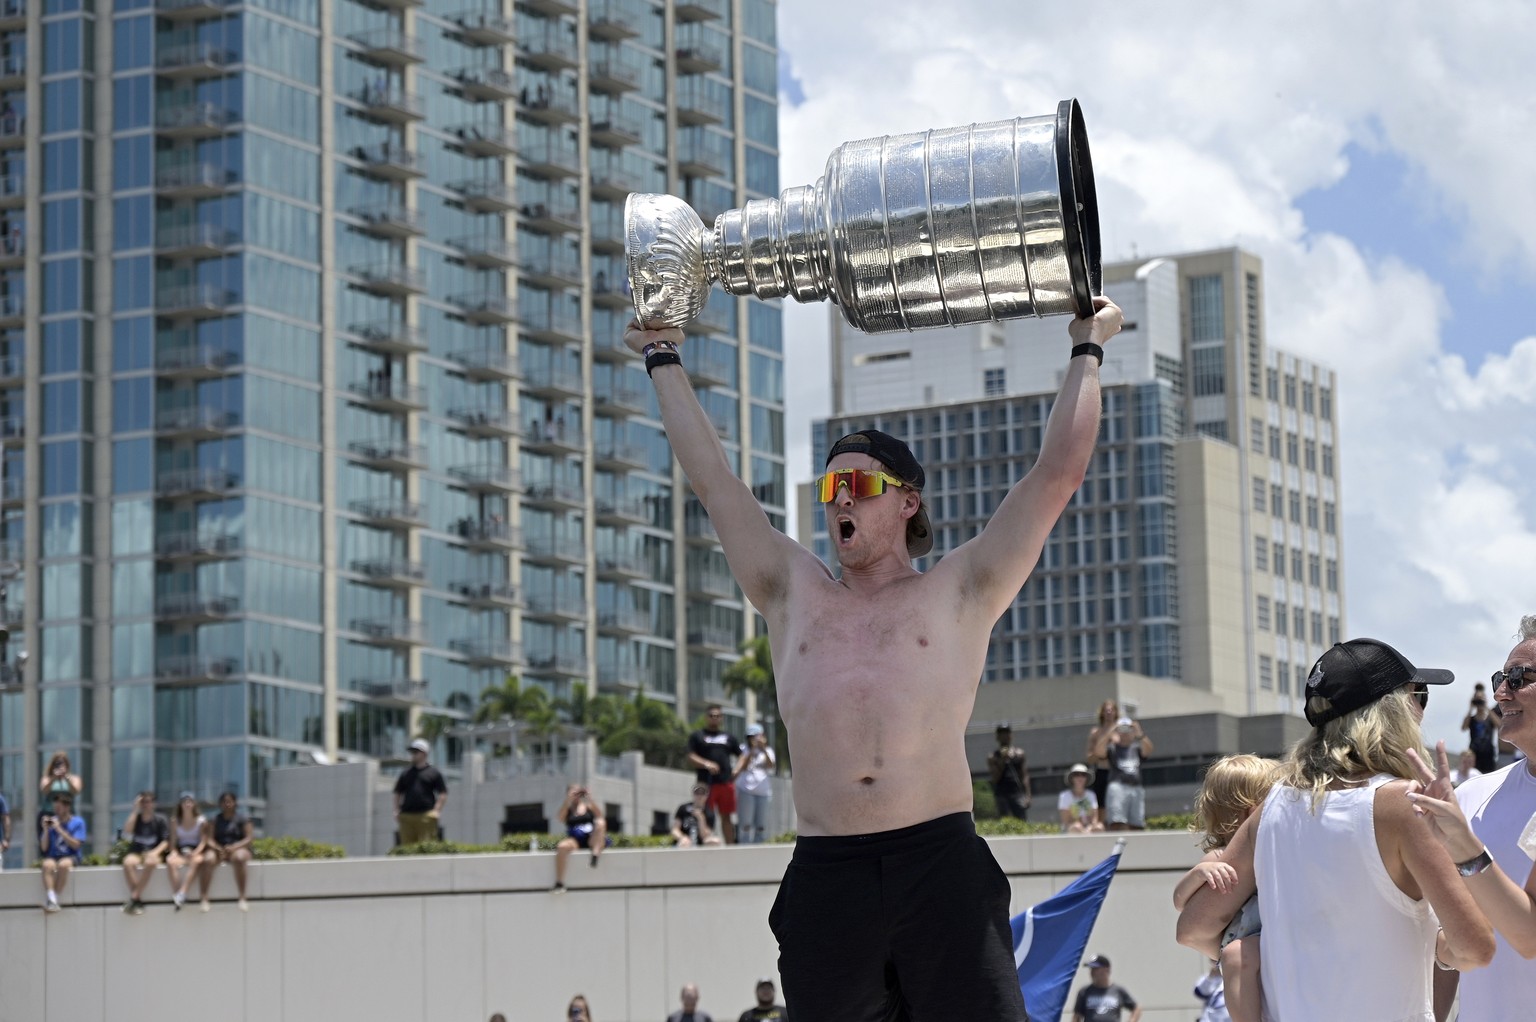 Tampa Bay Lightning center Blake Coleman hoists the Stanley Cup during the NHL hockey Stanley Cup champions&#039; Boat Parade, Monday, July 12, 2021, in Tampa, Fla. (AP Photo/Phelan M. Ebenhack)